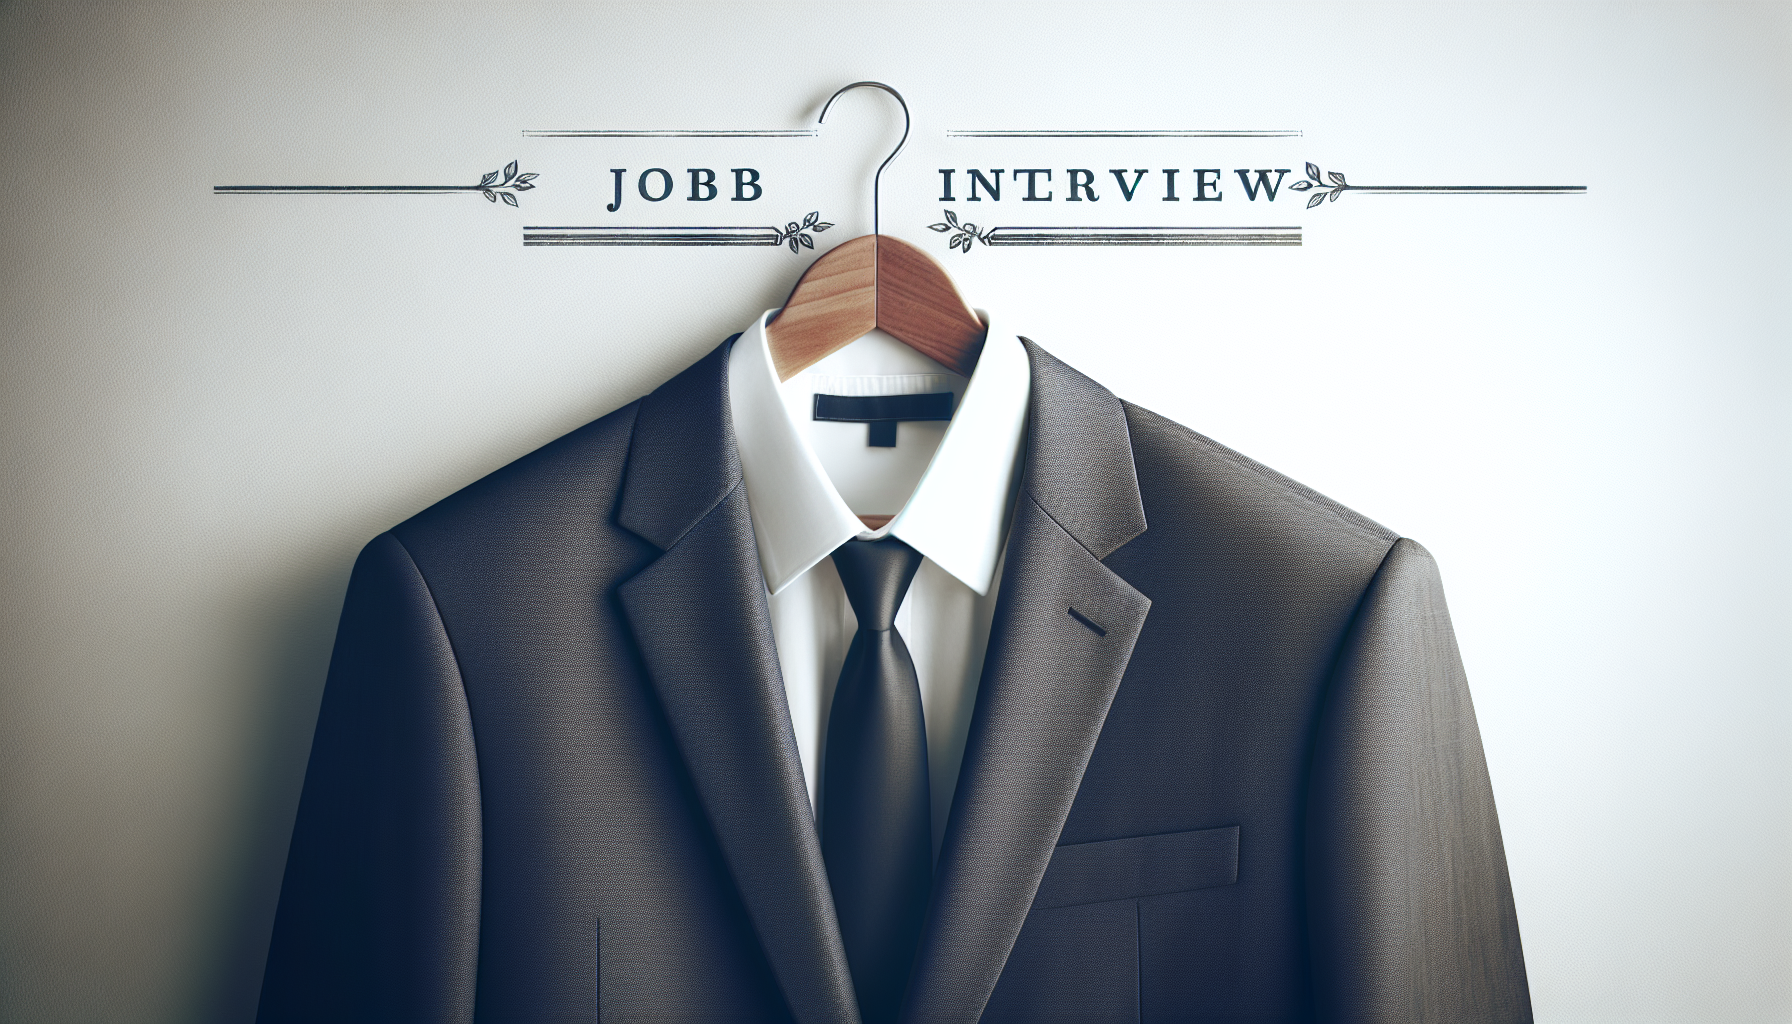 What Should I Wear To A Job Interview?